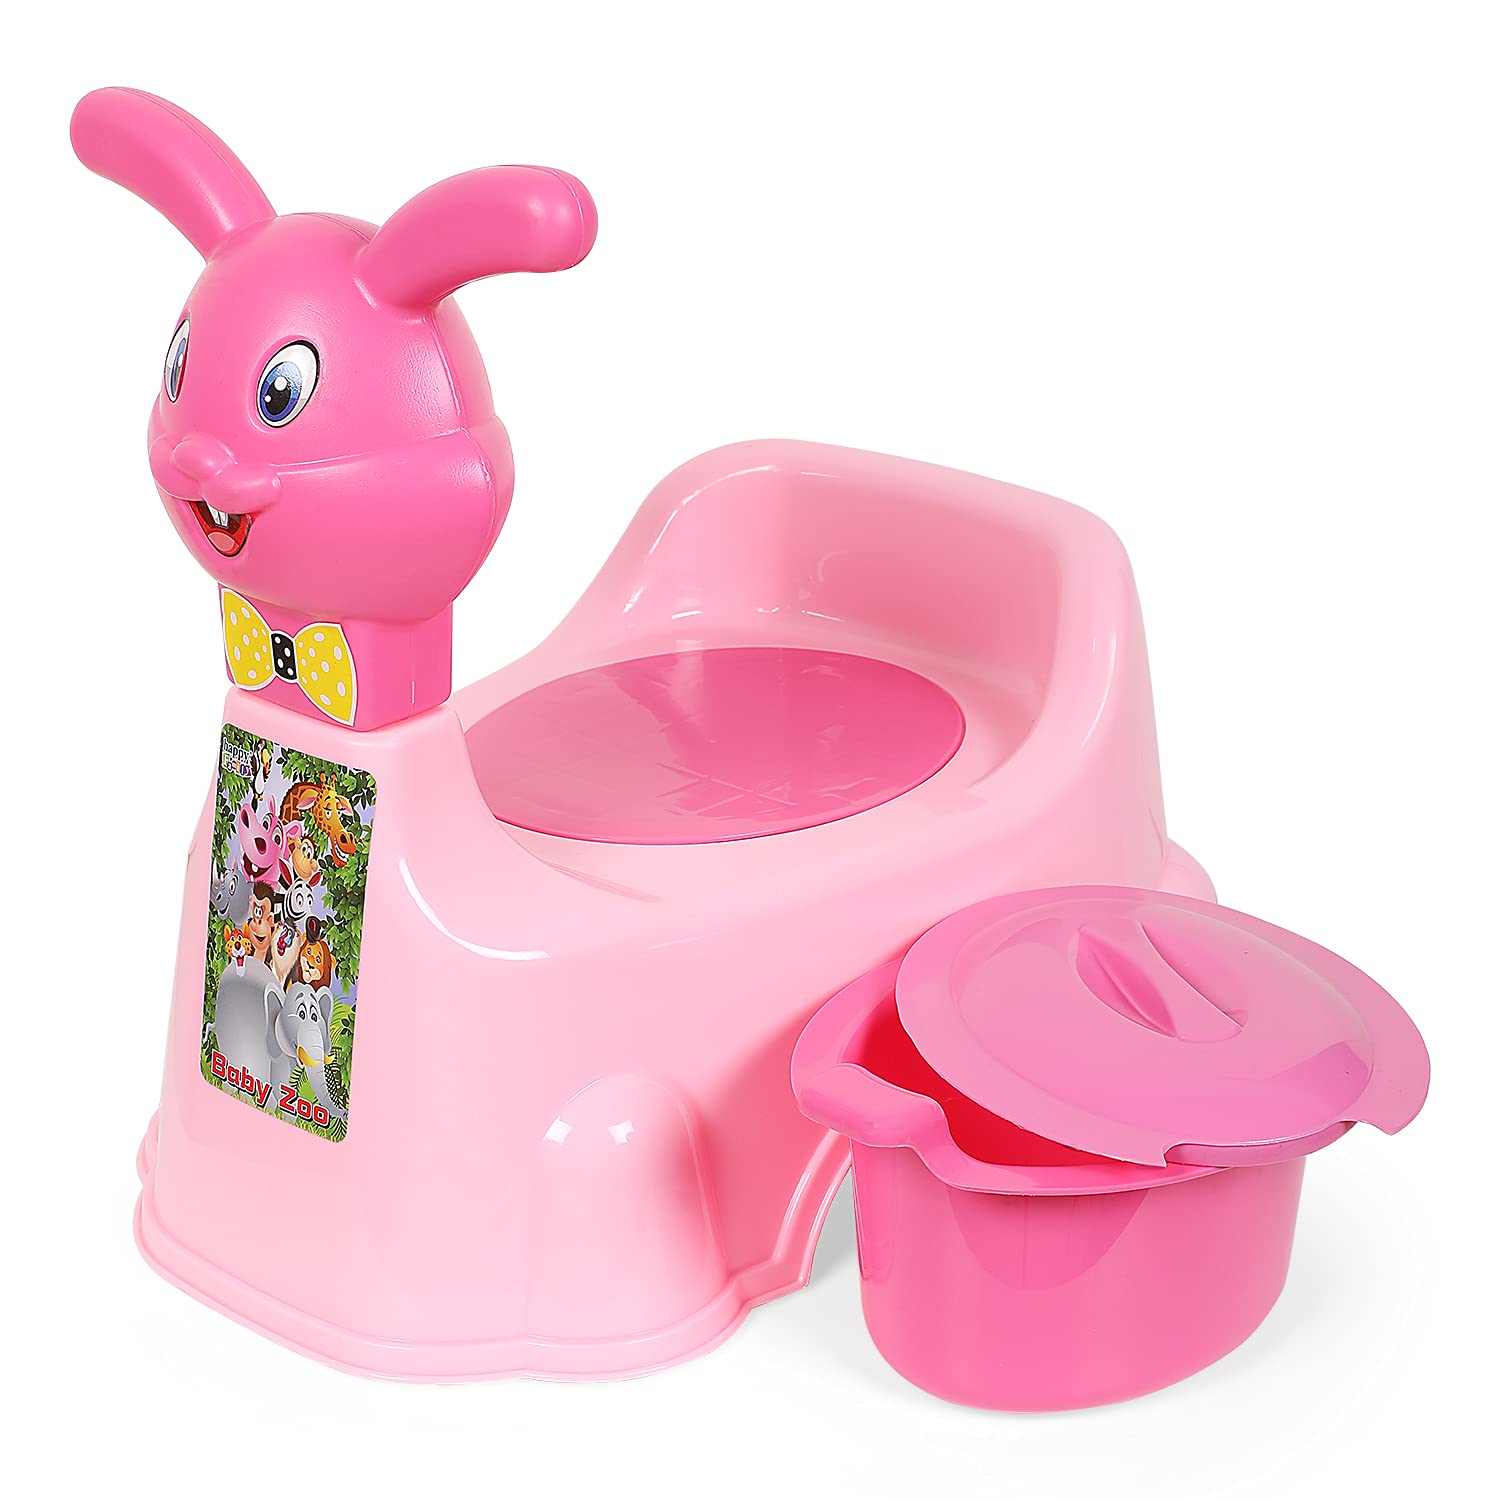 types of baby toilet training Sgs certificate baby toilet training seat rabbit shape plastic infant